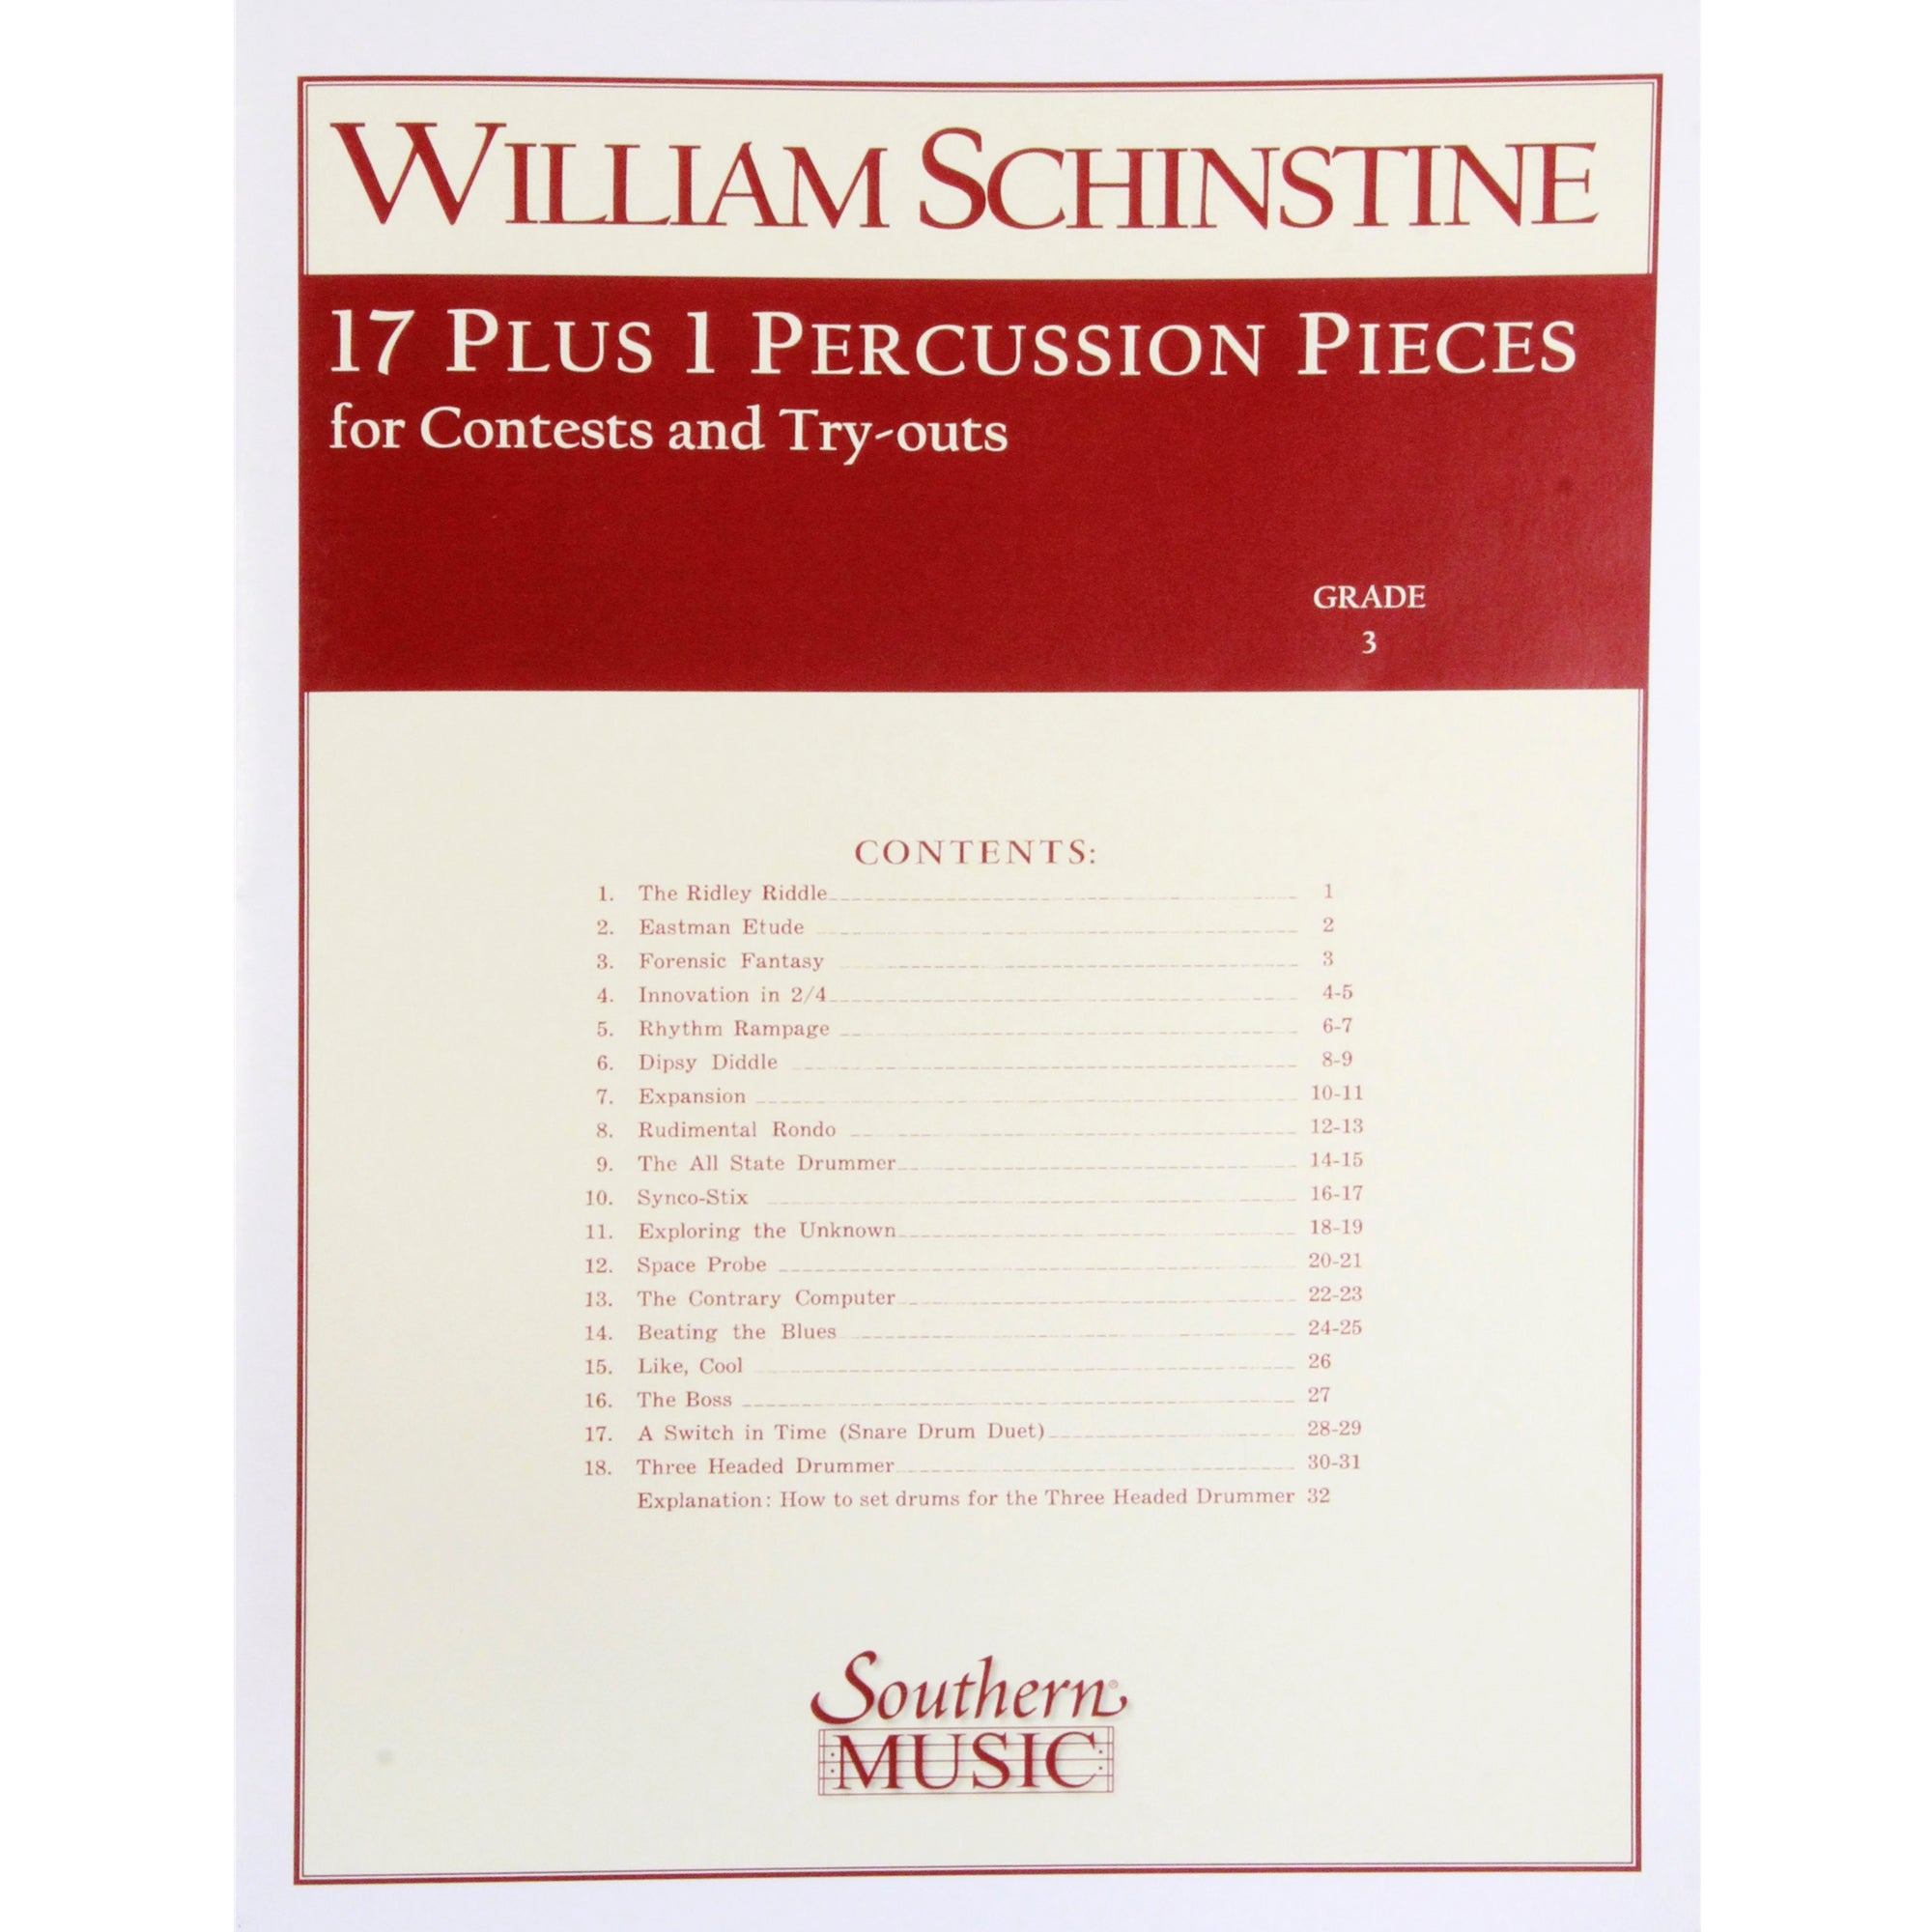 SOUTHERN B226 17 + 1 Percussion Pieces